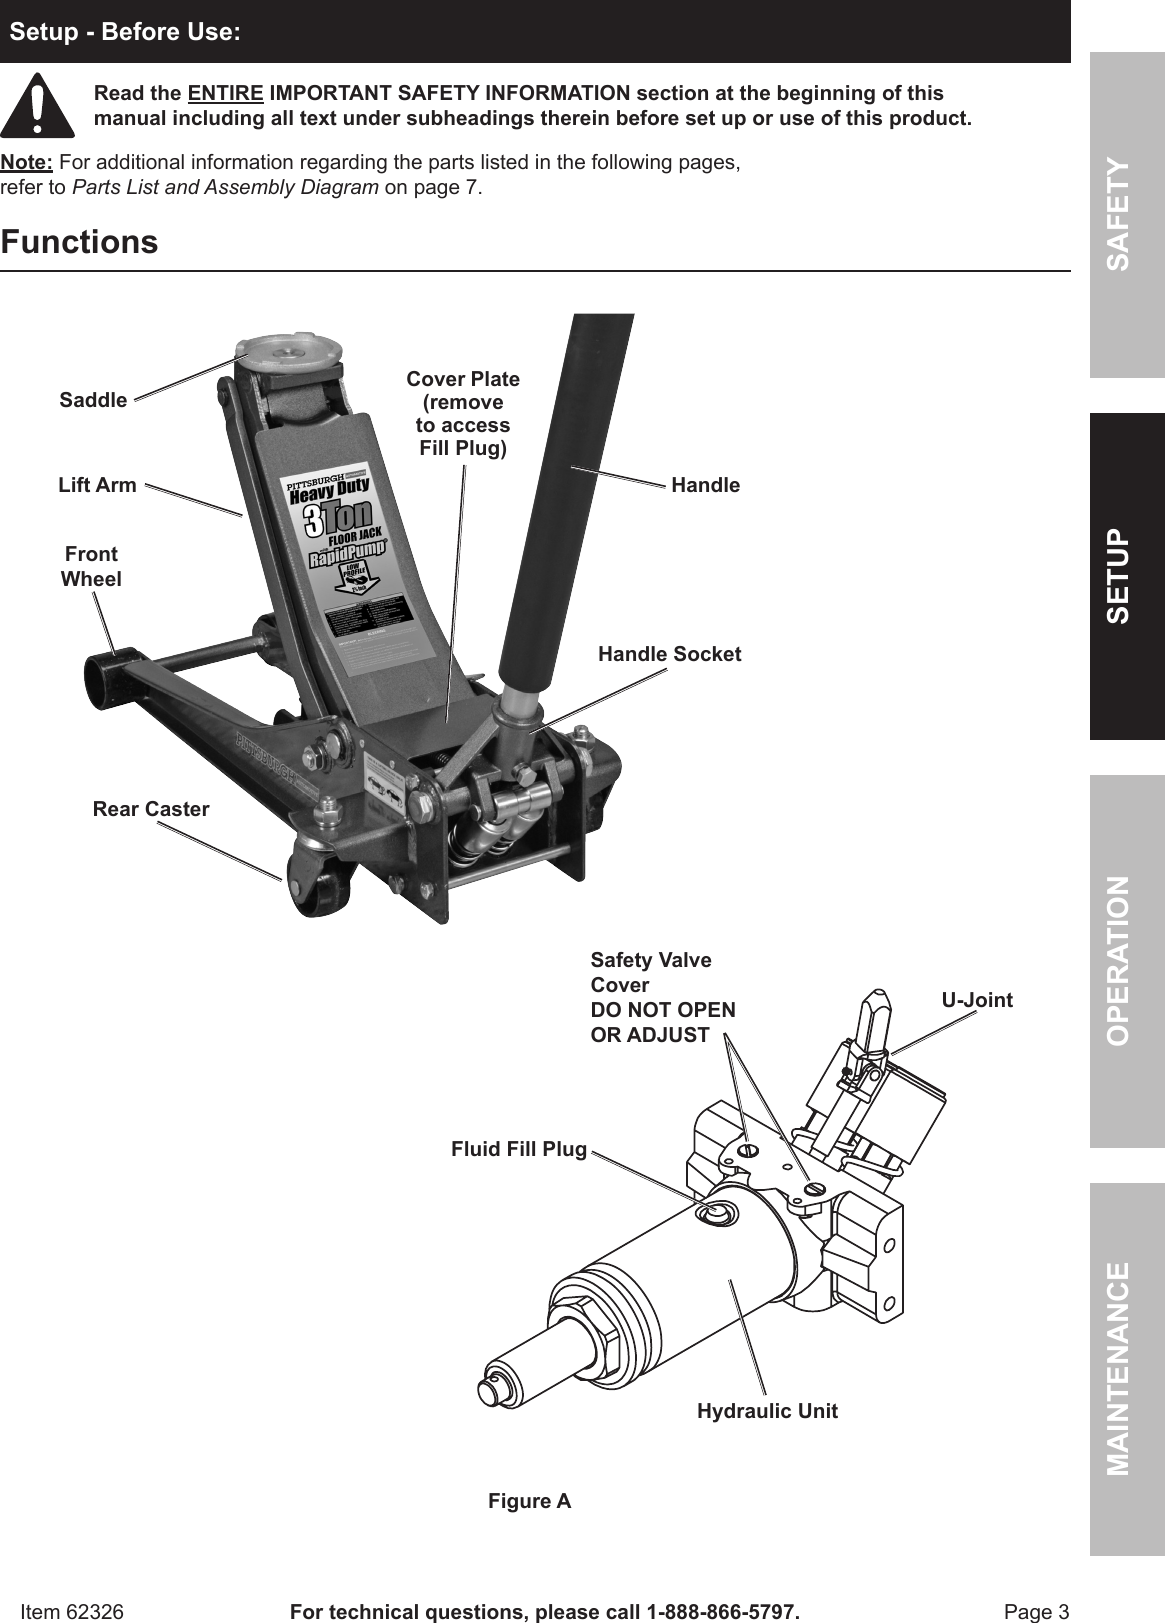 Page 3 of 8 - Manual For The 62326 3 Ton Low Profile Steel Heavy Duty Floor Jack With Rapid Pump®